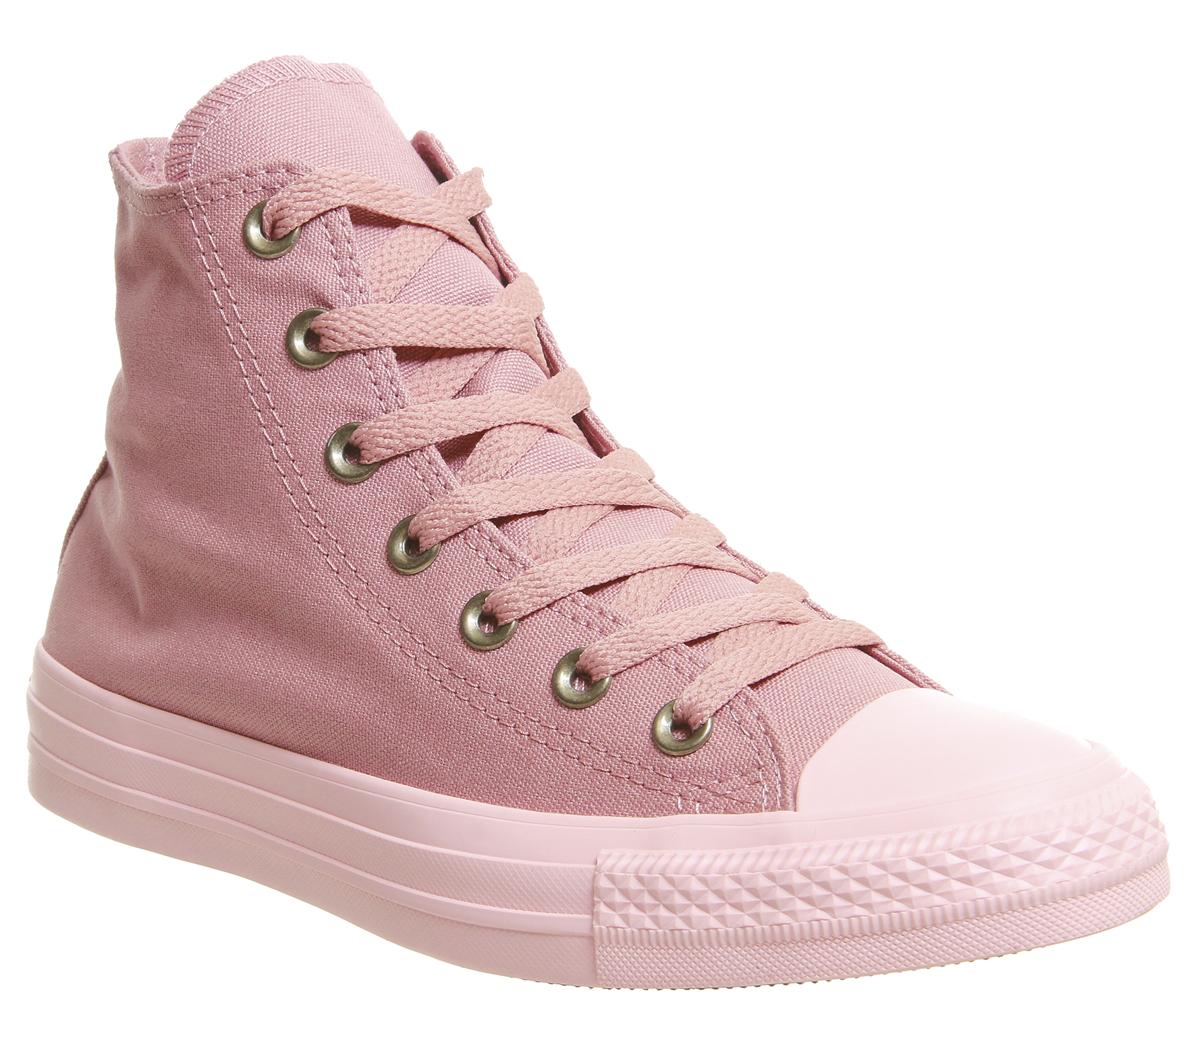 Converse Converse All Star Hi Trainers Rust Pink - Hers trainers